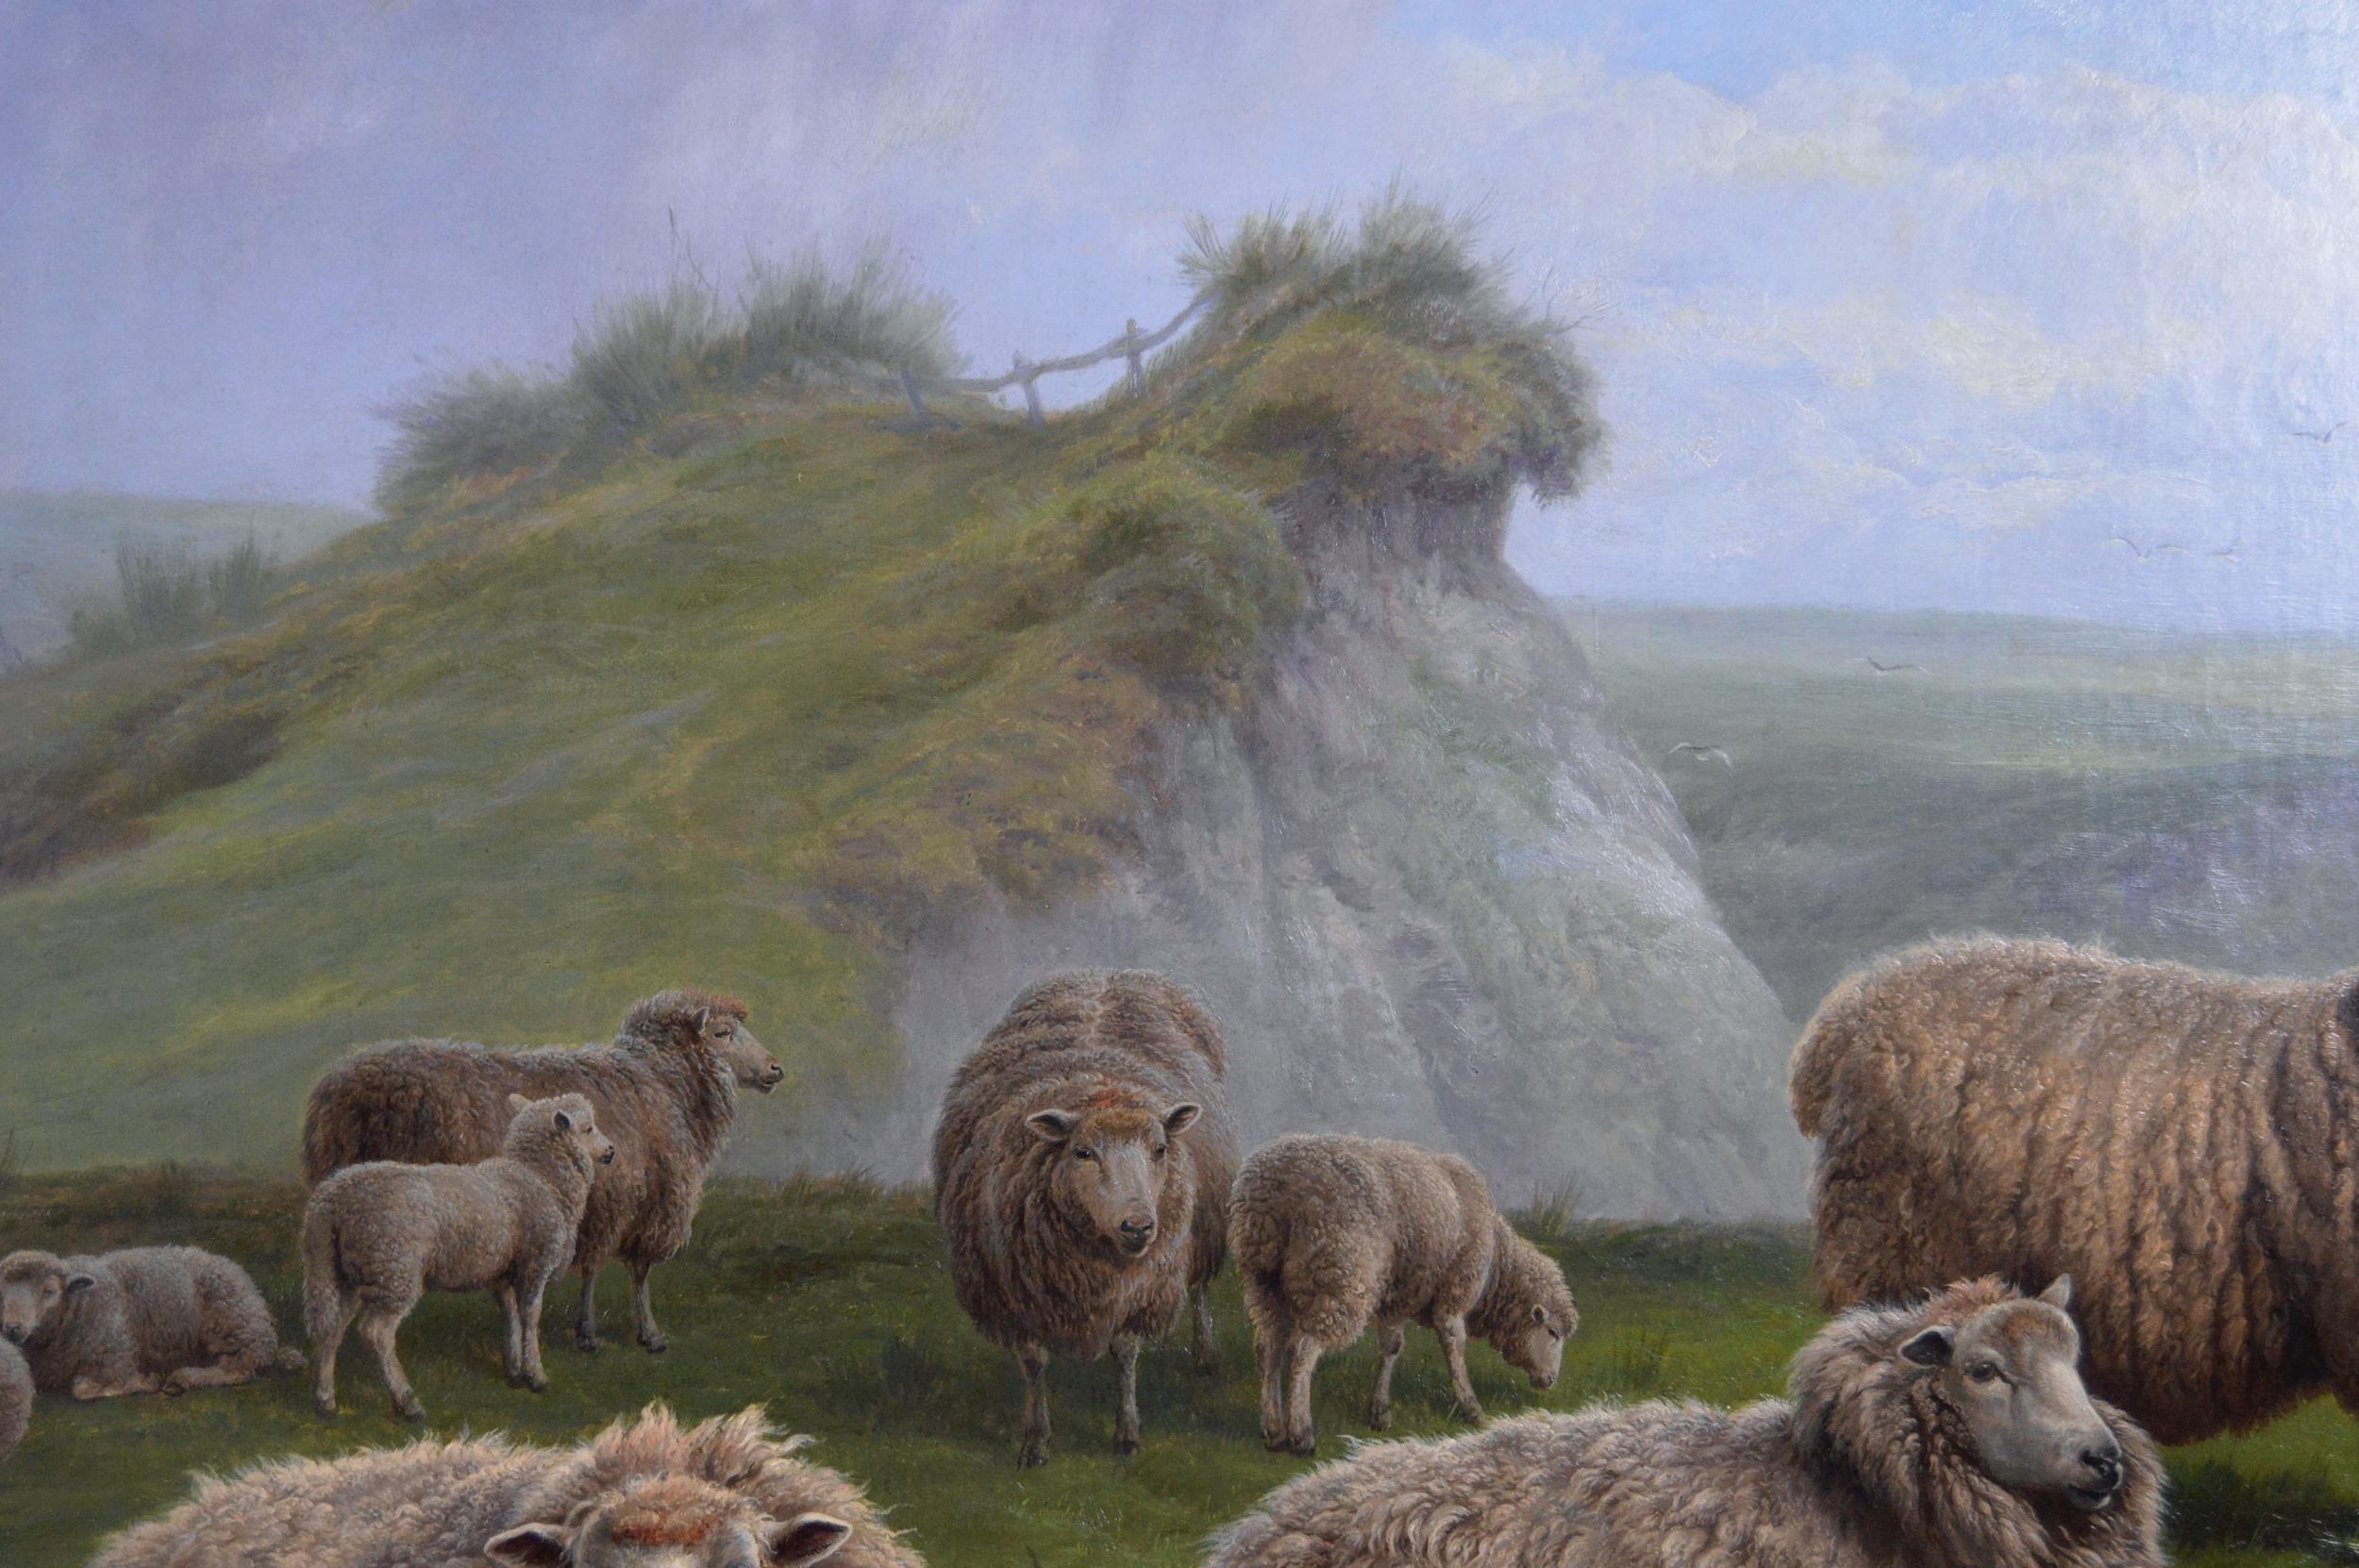 Charles Jones
British, (1836-1892)
Sheep Resting
Oil on canvas, signed with monogram & dated 1877, further inscribed verso
Image size: 35 inches x 59 inches
Size including frame: 47 inches x 71 inches
Exhibition Size Painting

A fantastic exhibition